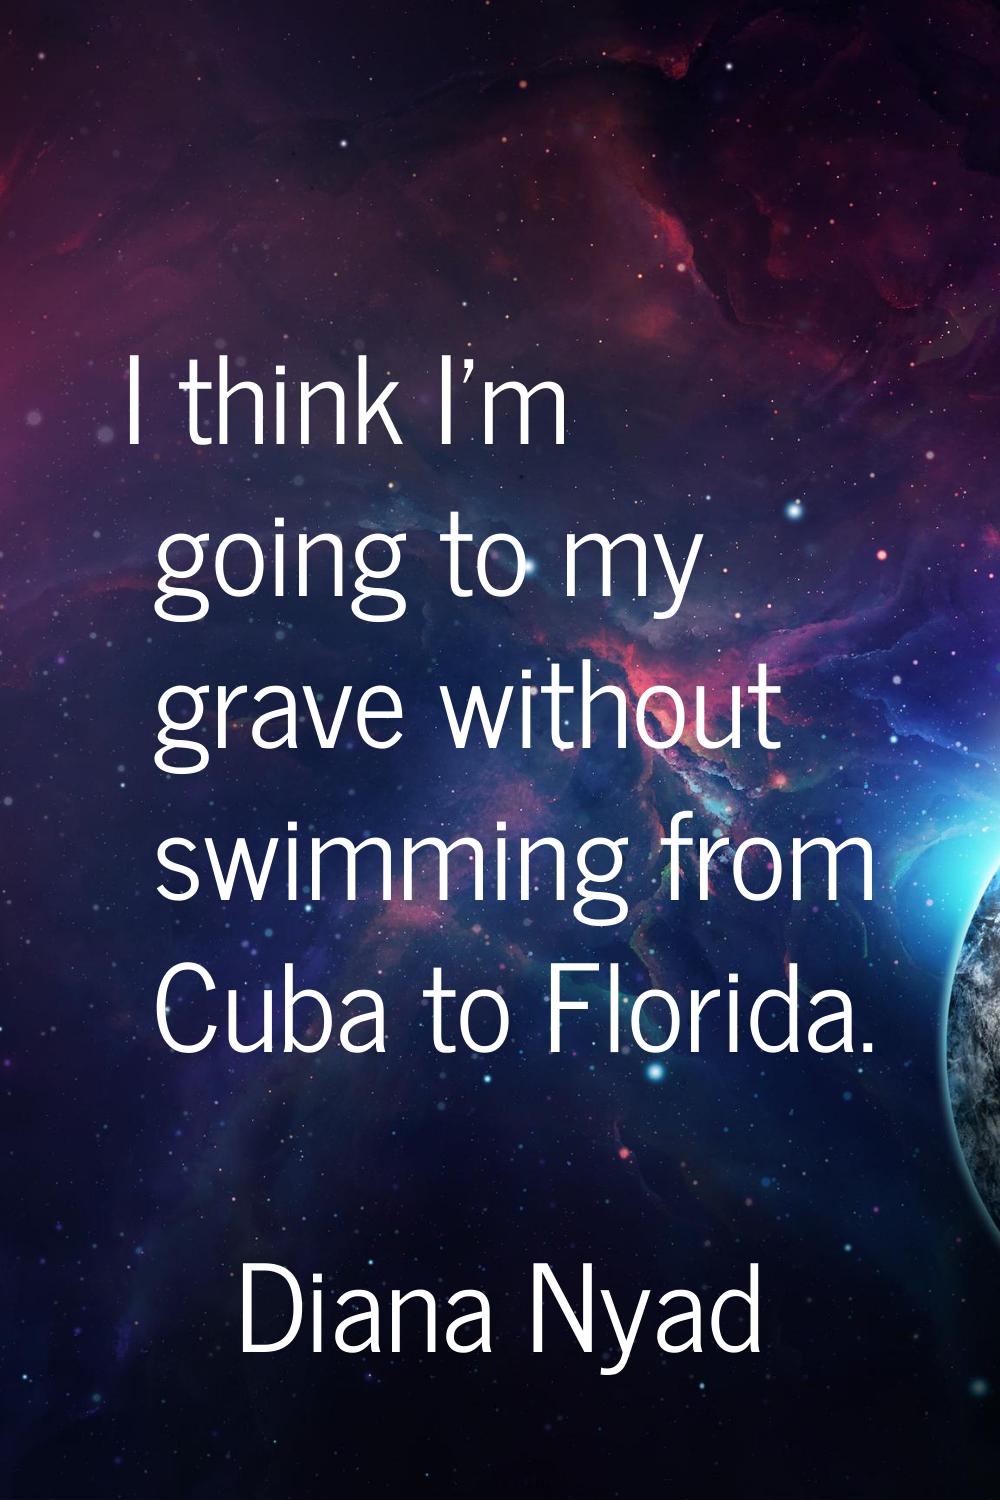 I think I'm going to my grave without swimming from Cuba to Florida.